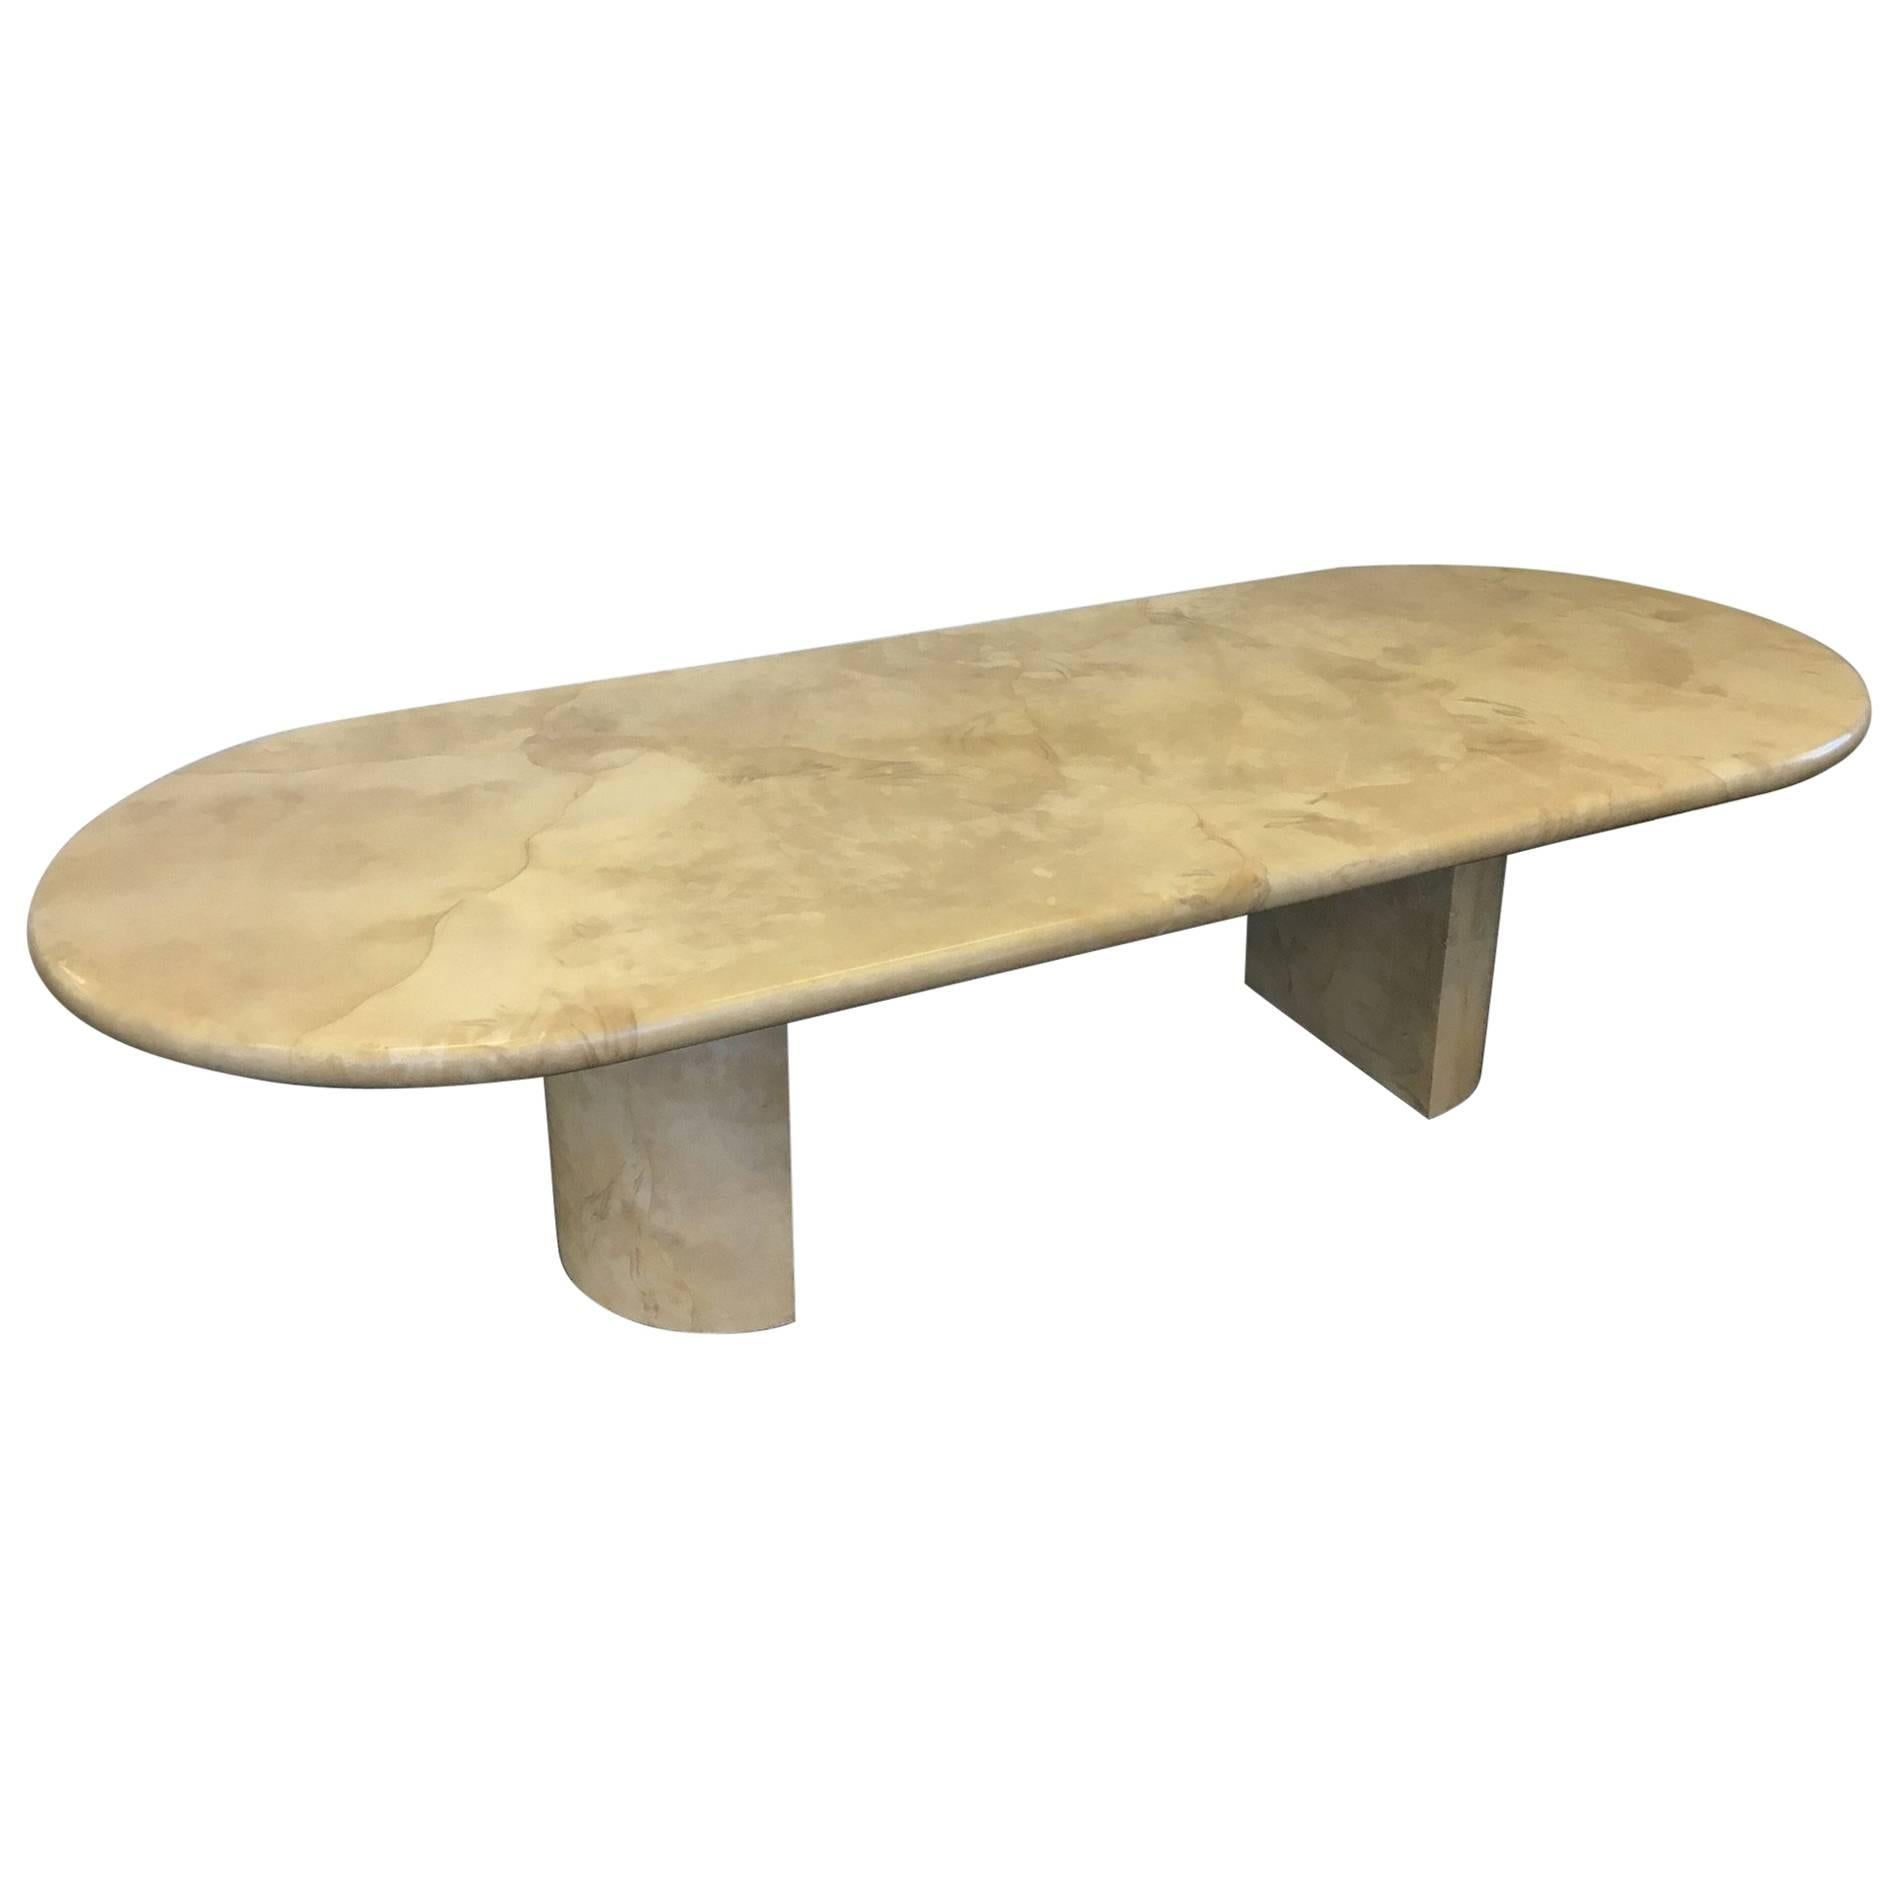 Large Oval Lacquered Goatskin Dining Table by Karl Springer